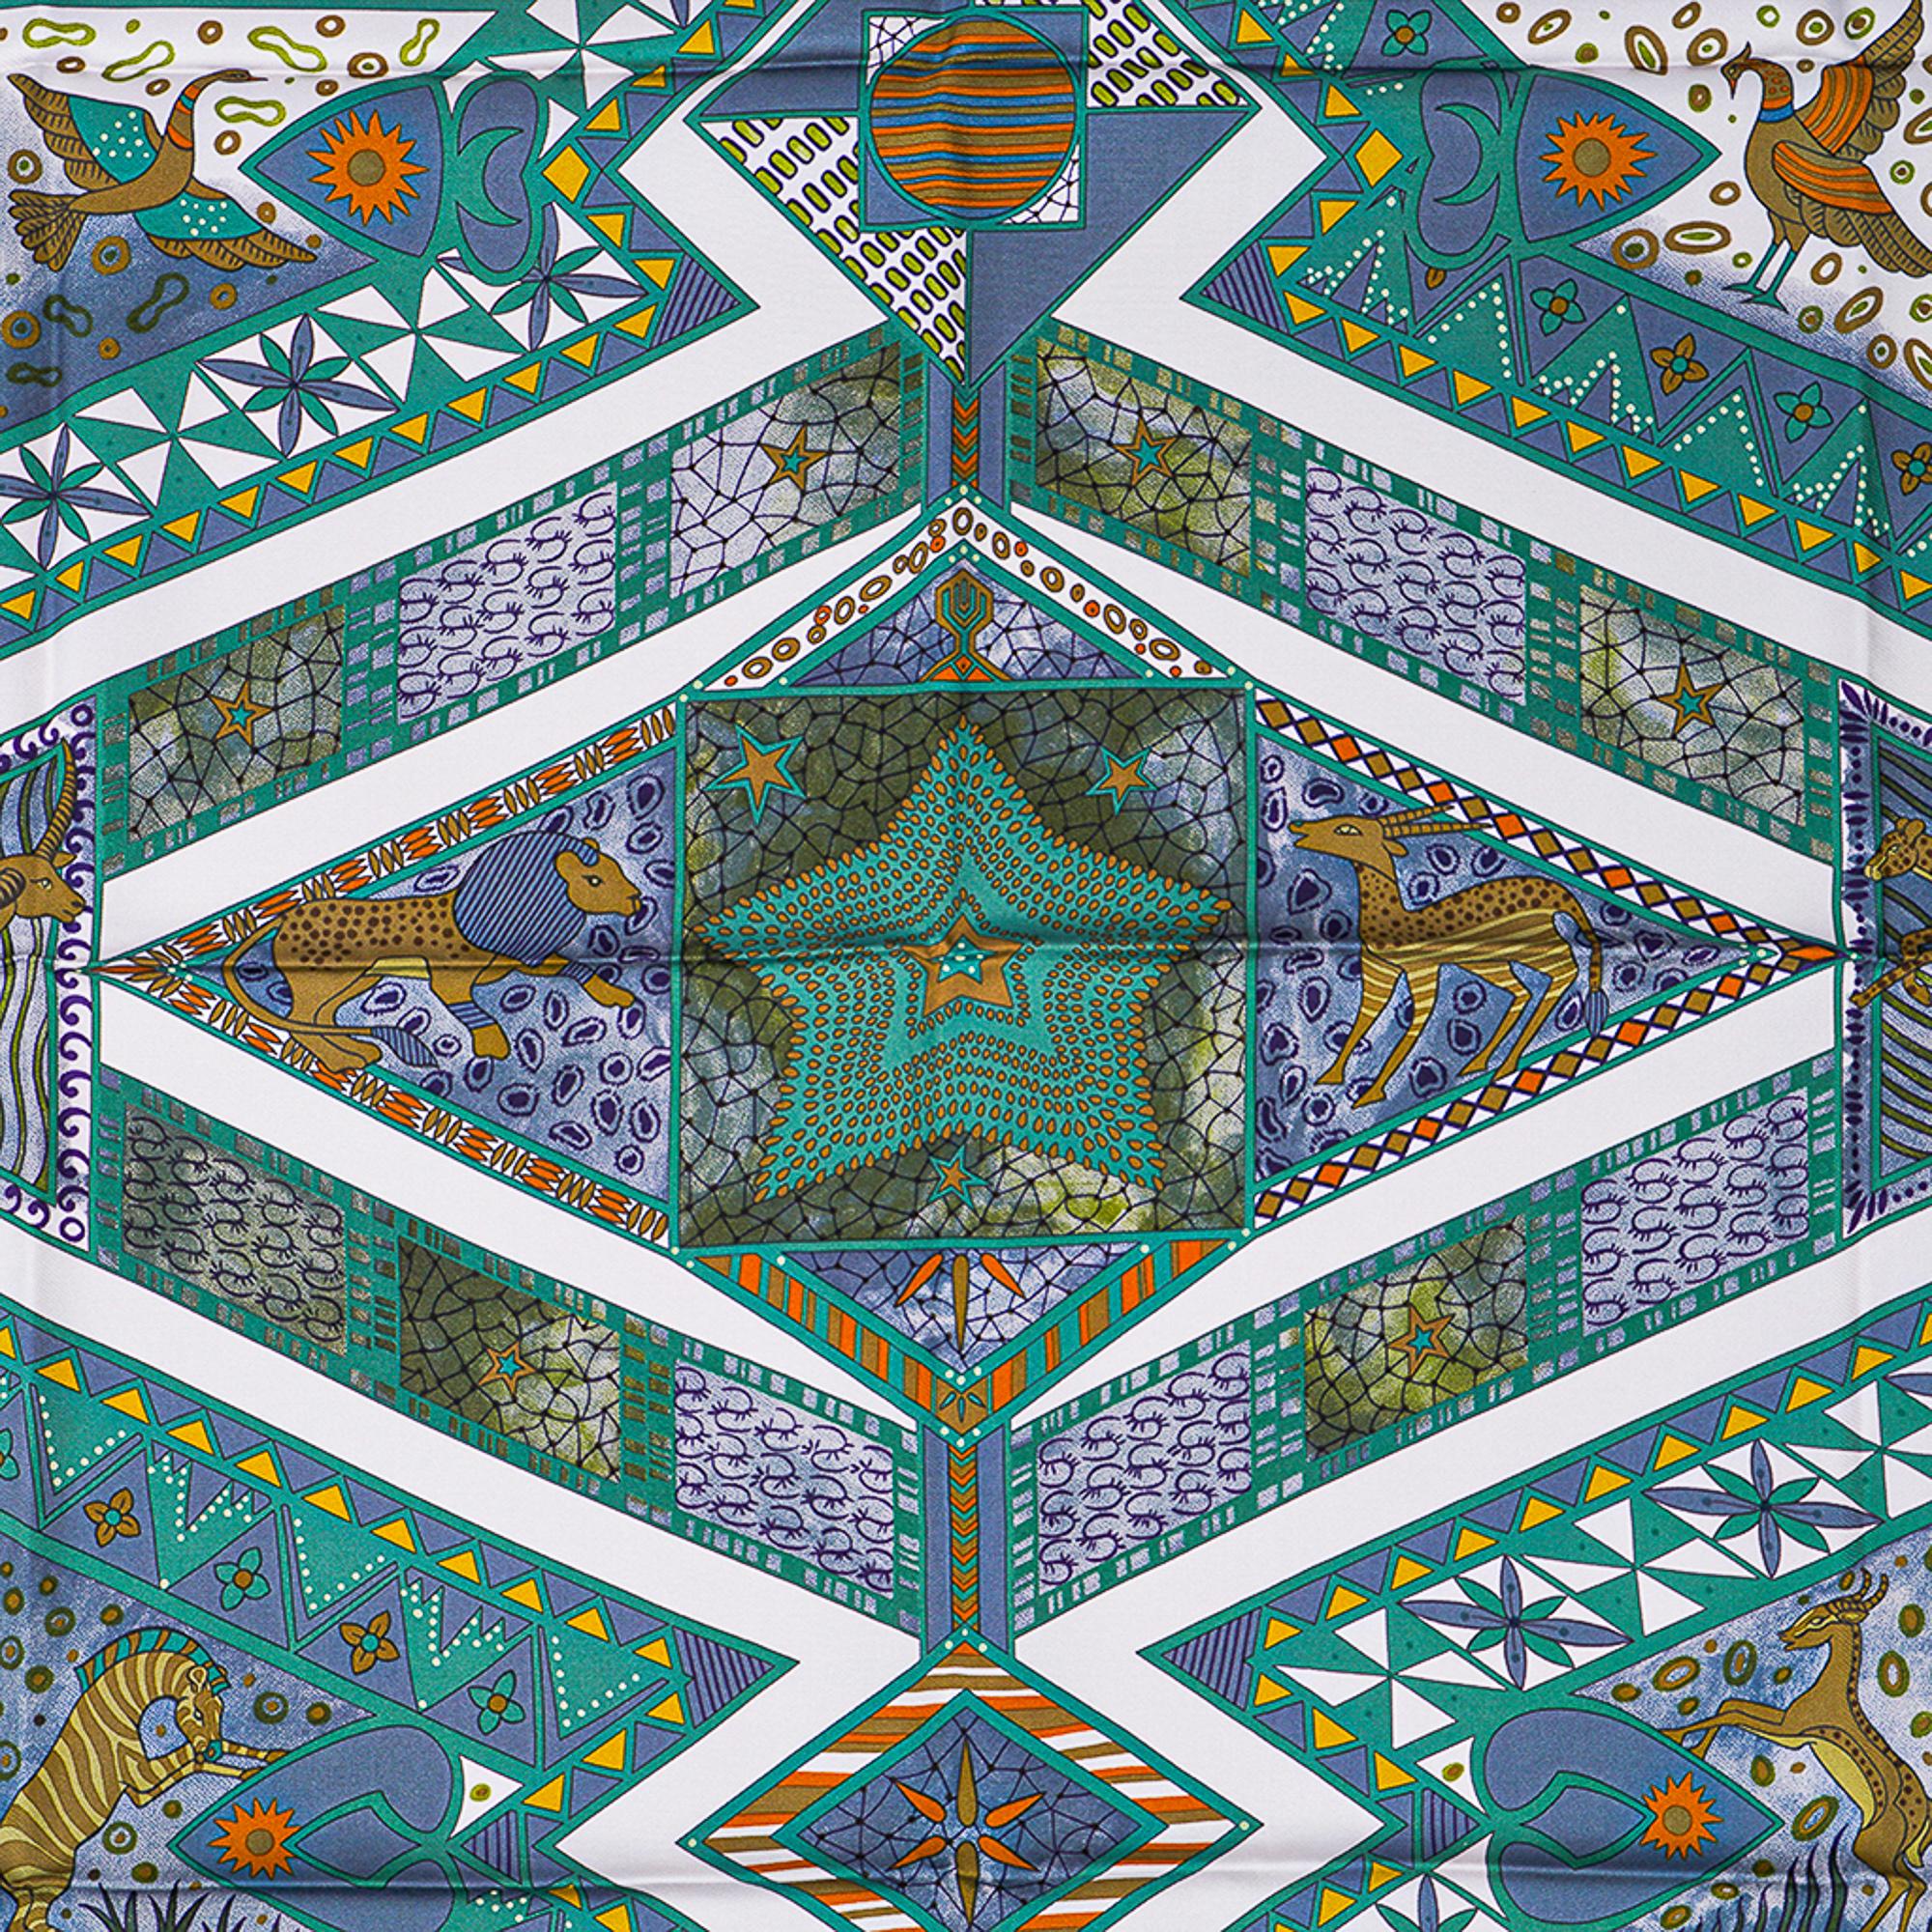 Mightychic offers an Hermes Ors Bleus d'Afrique silk scarf by Zoe Pauwels.
Green, Chartreuse and Brown colorway.
Depicts the rich African geometric designs and animals native to the continent.
Signature hand rolled edge.
Comes with signature Hermes